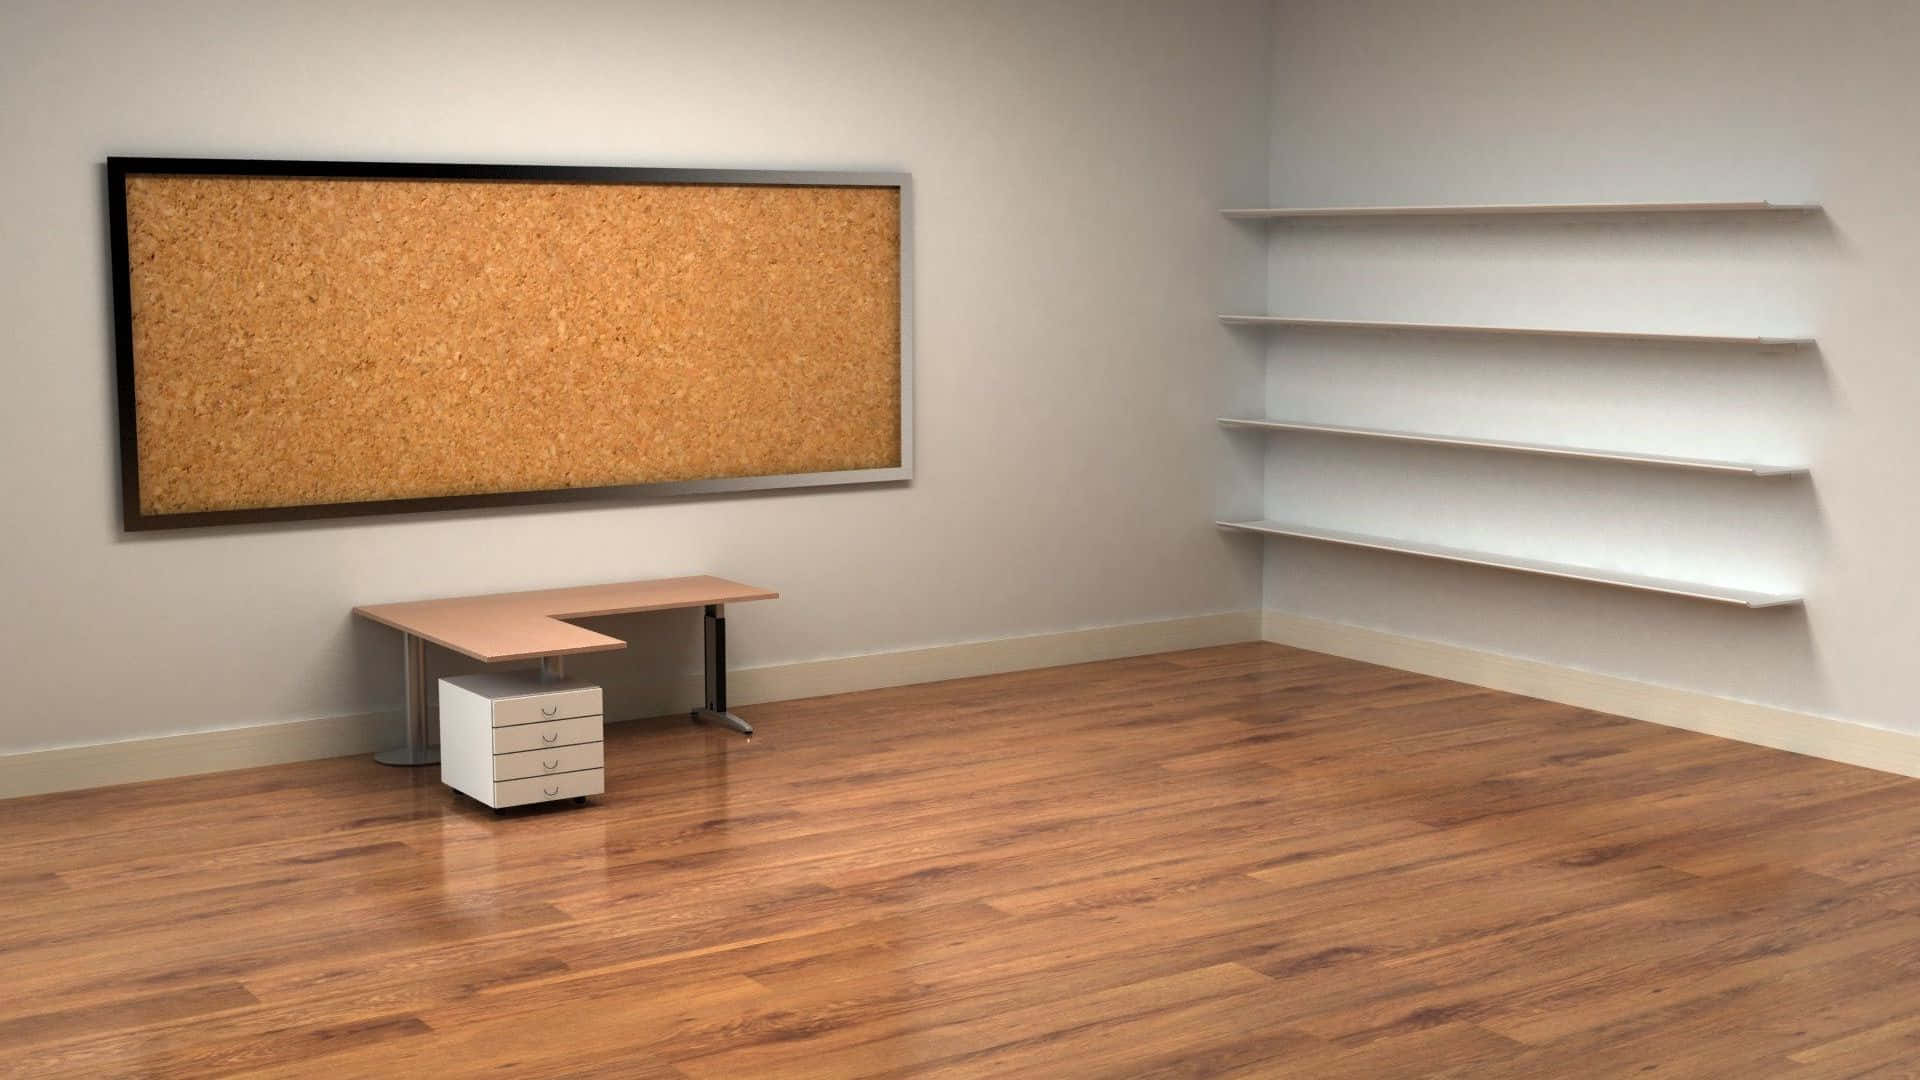 Beautify Your Office with Sleek Furniture and Wall Design